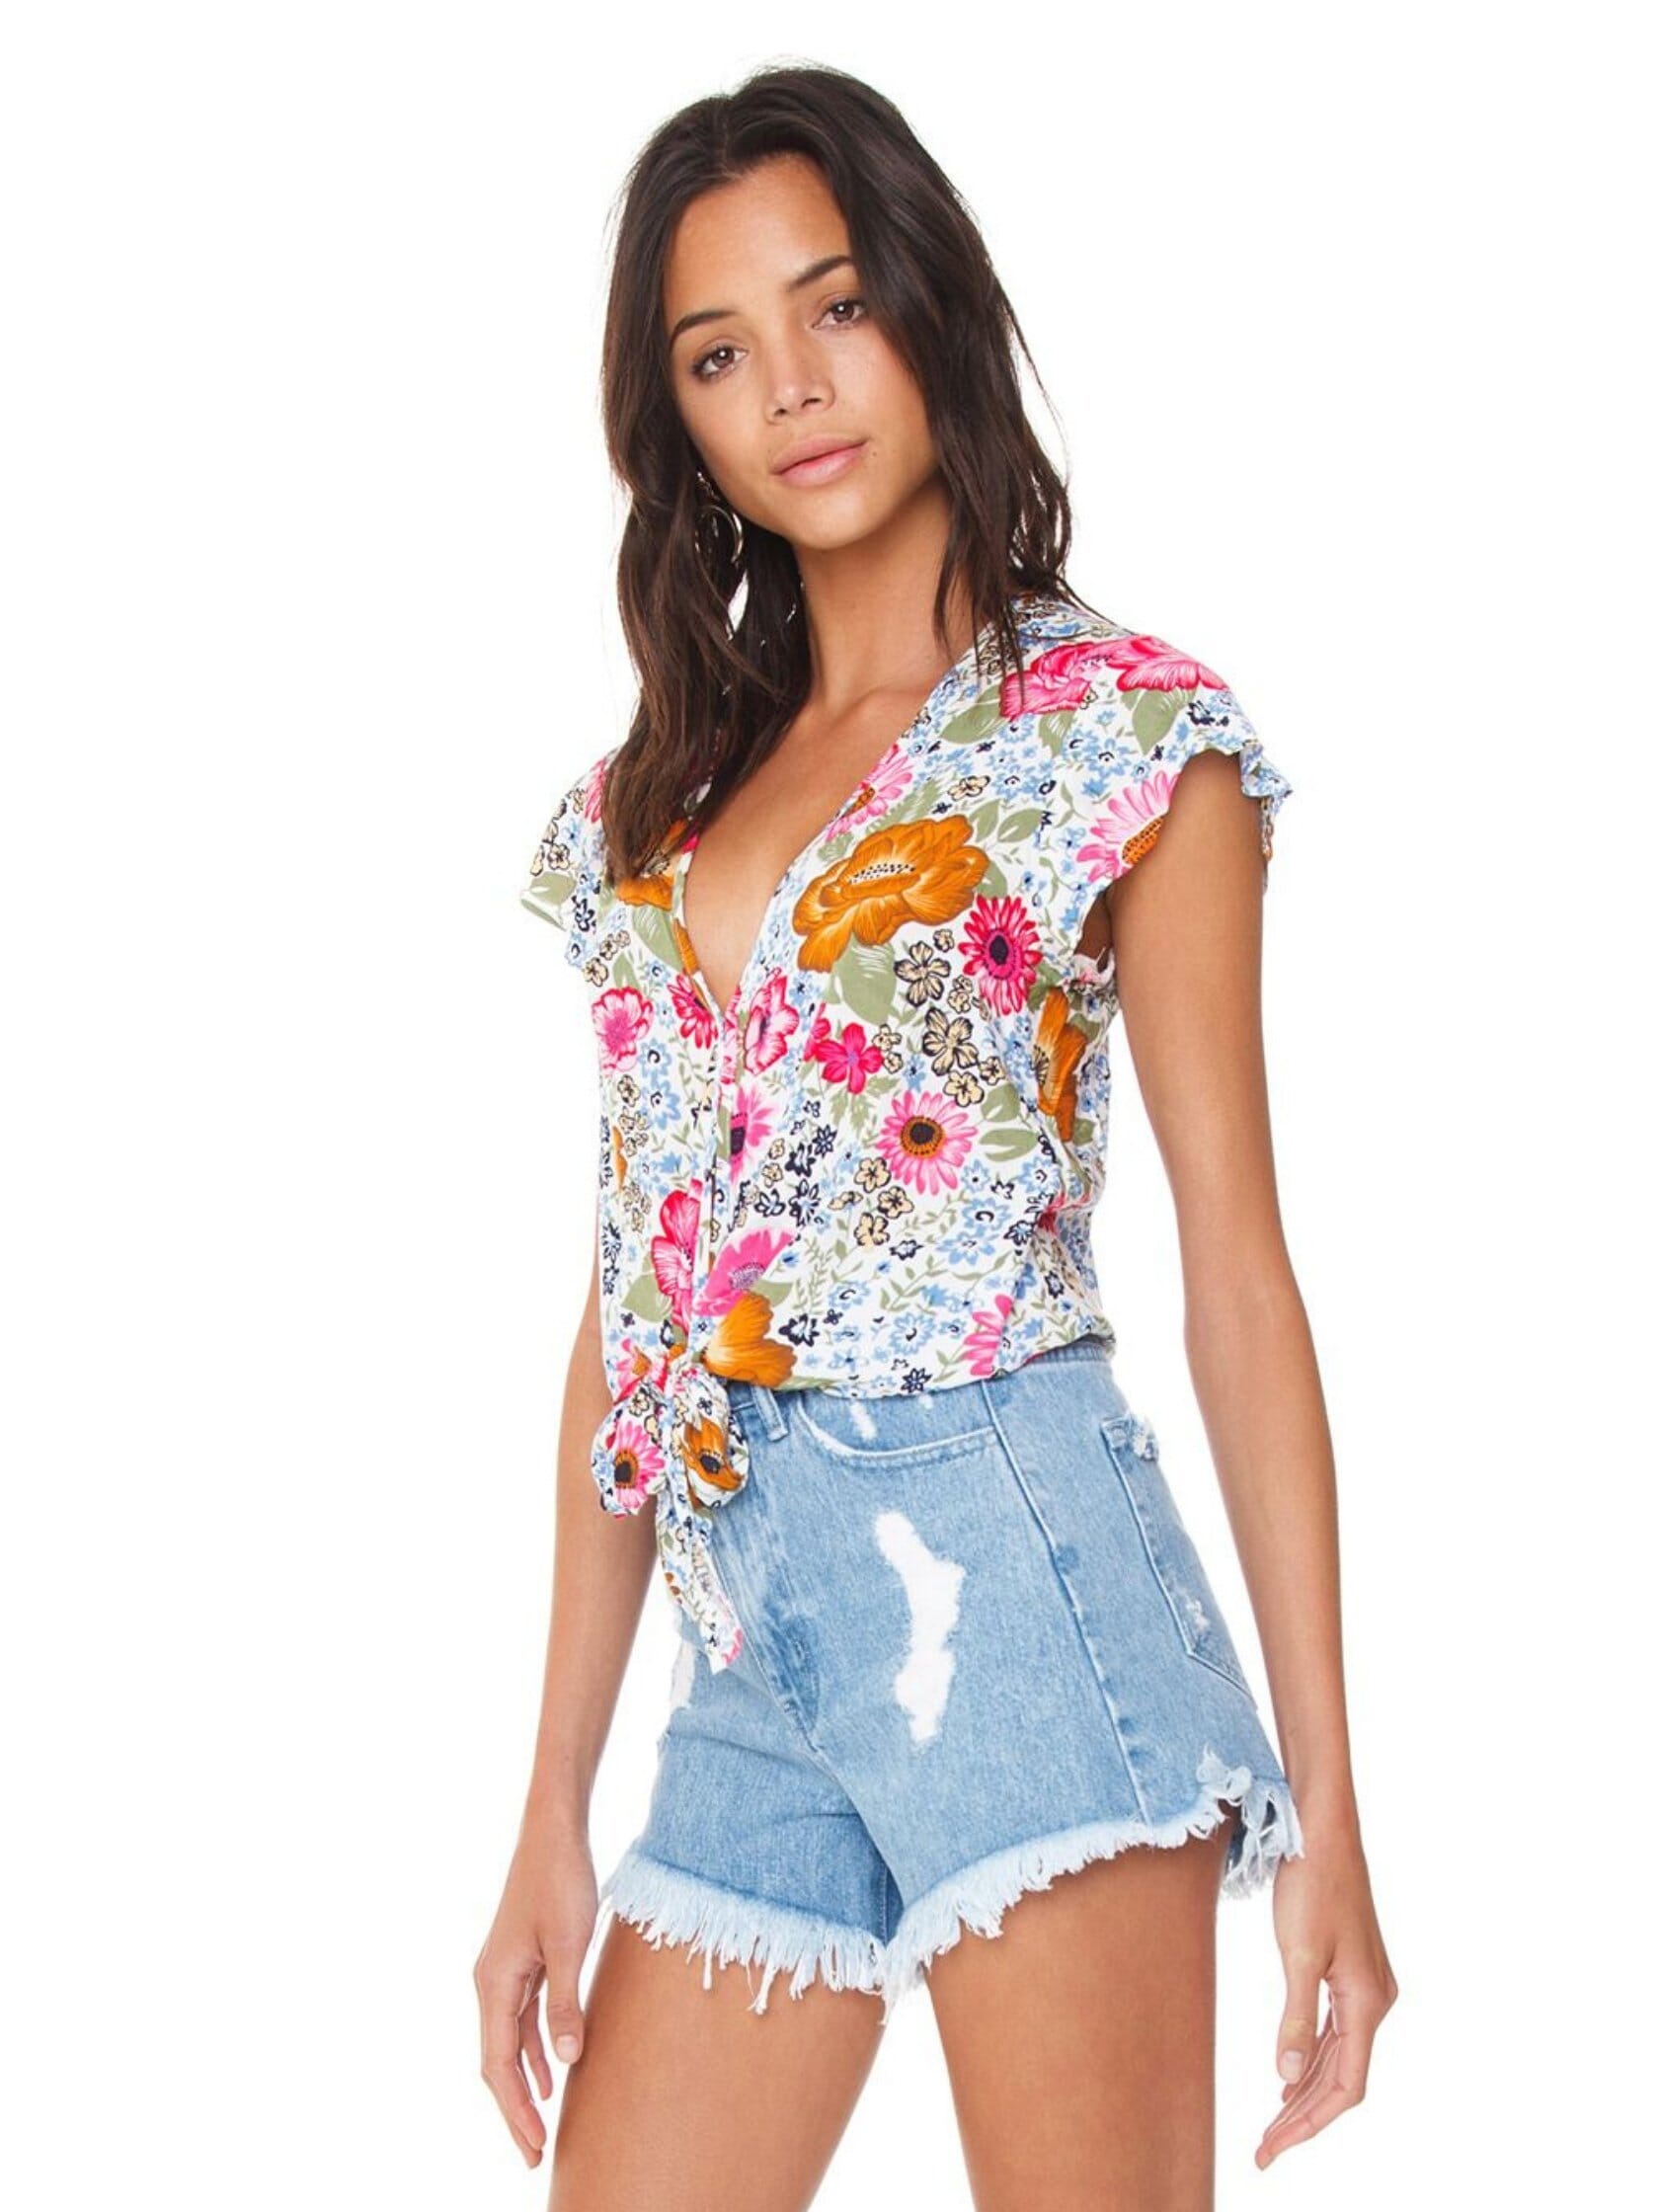 XIX Palms San Francisco Knot Top in Floral